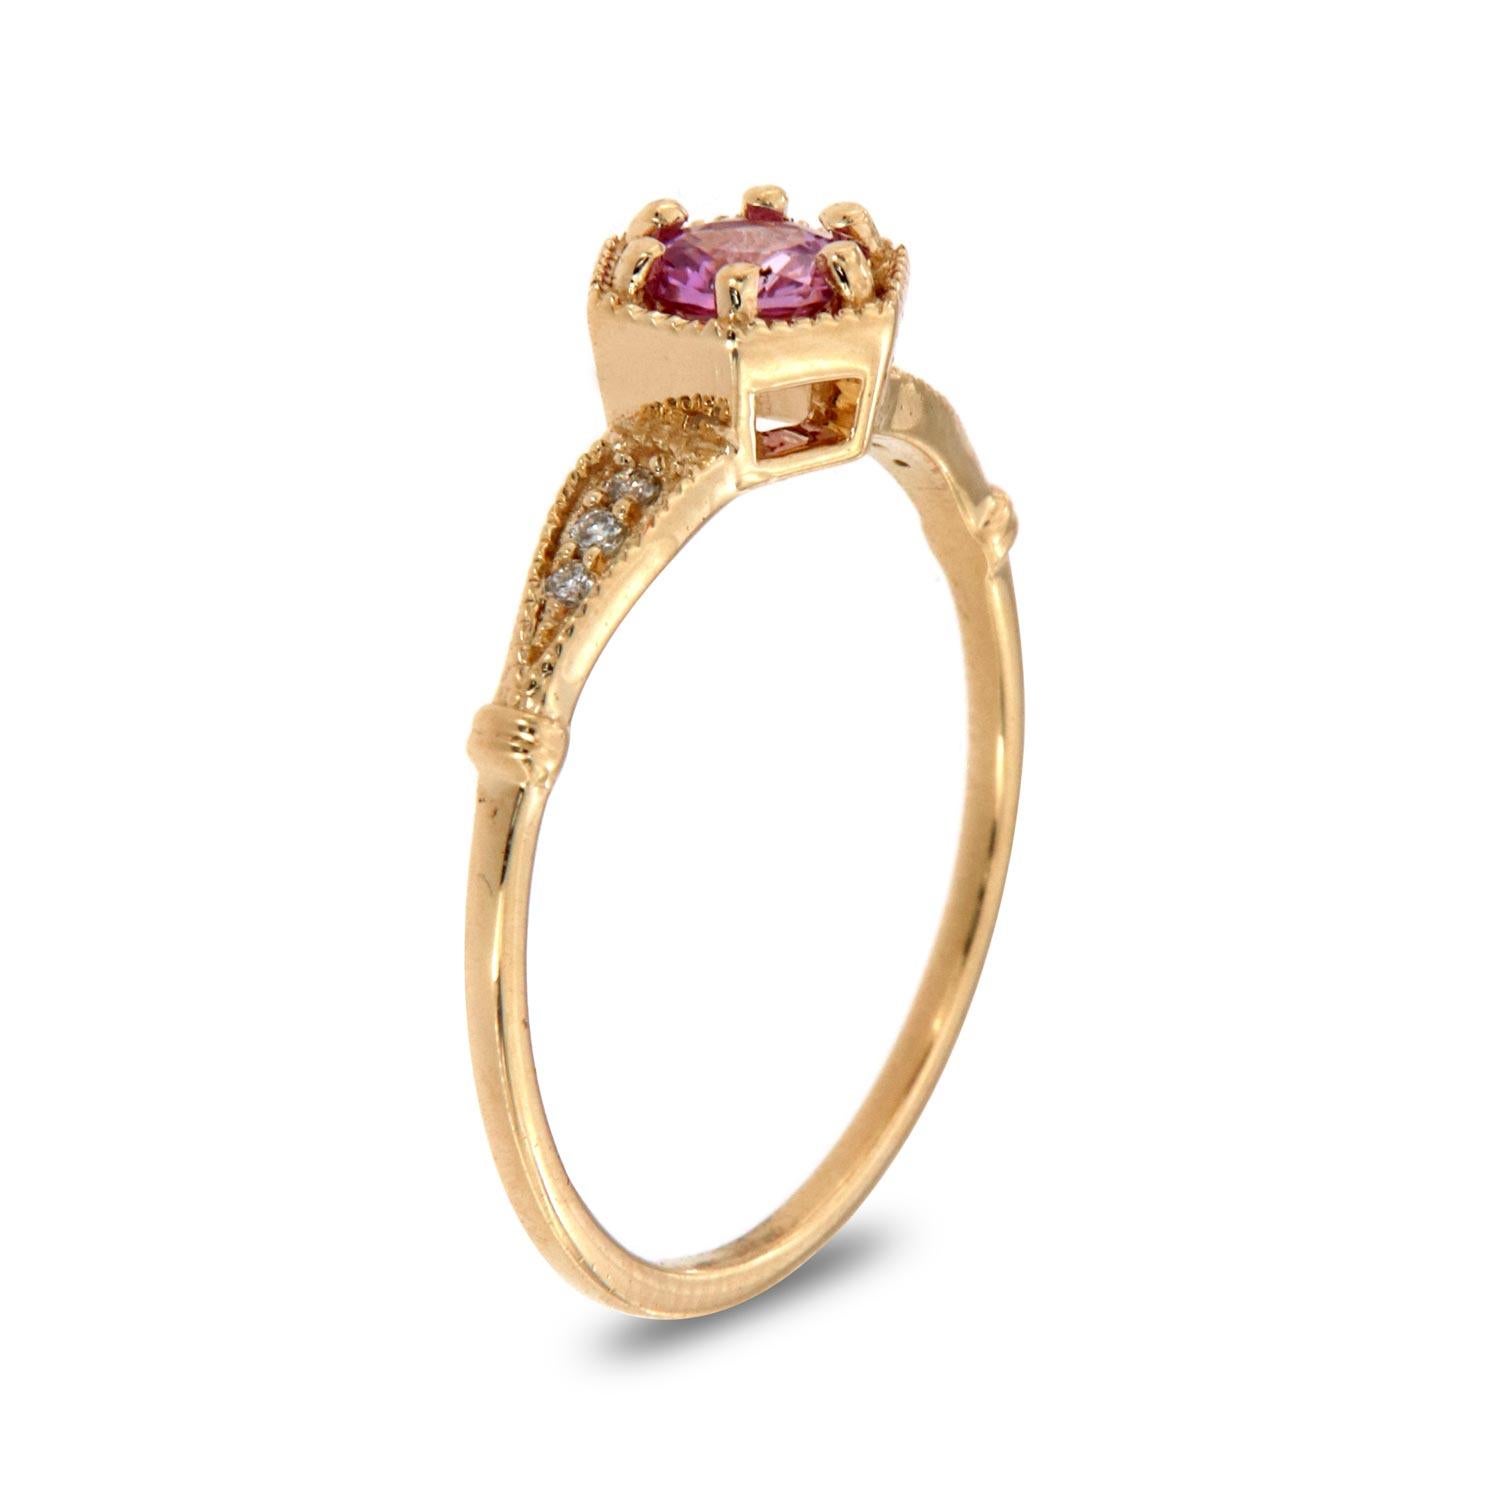 This rustic designed ring is impressive in its vintage appeal, featuring a natural pink round sapphire, accented with milgrain and round brilliant diamonds. Experience the difference in person!

Product details: 

Center Gemstone Type: